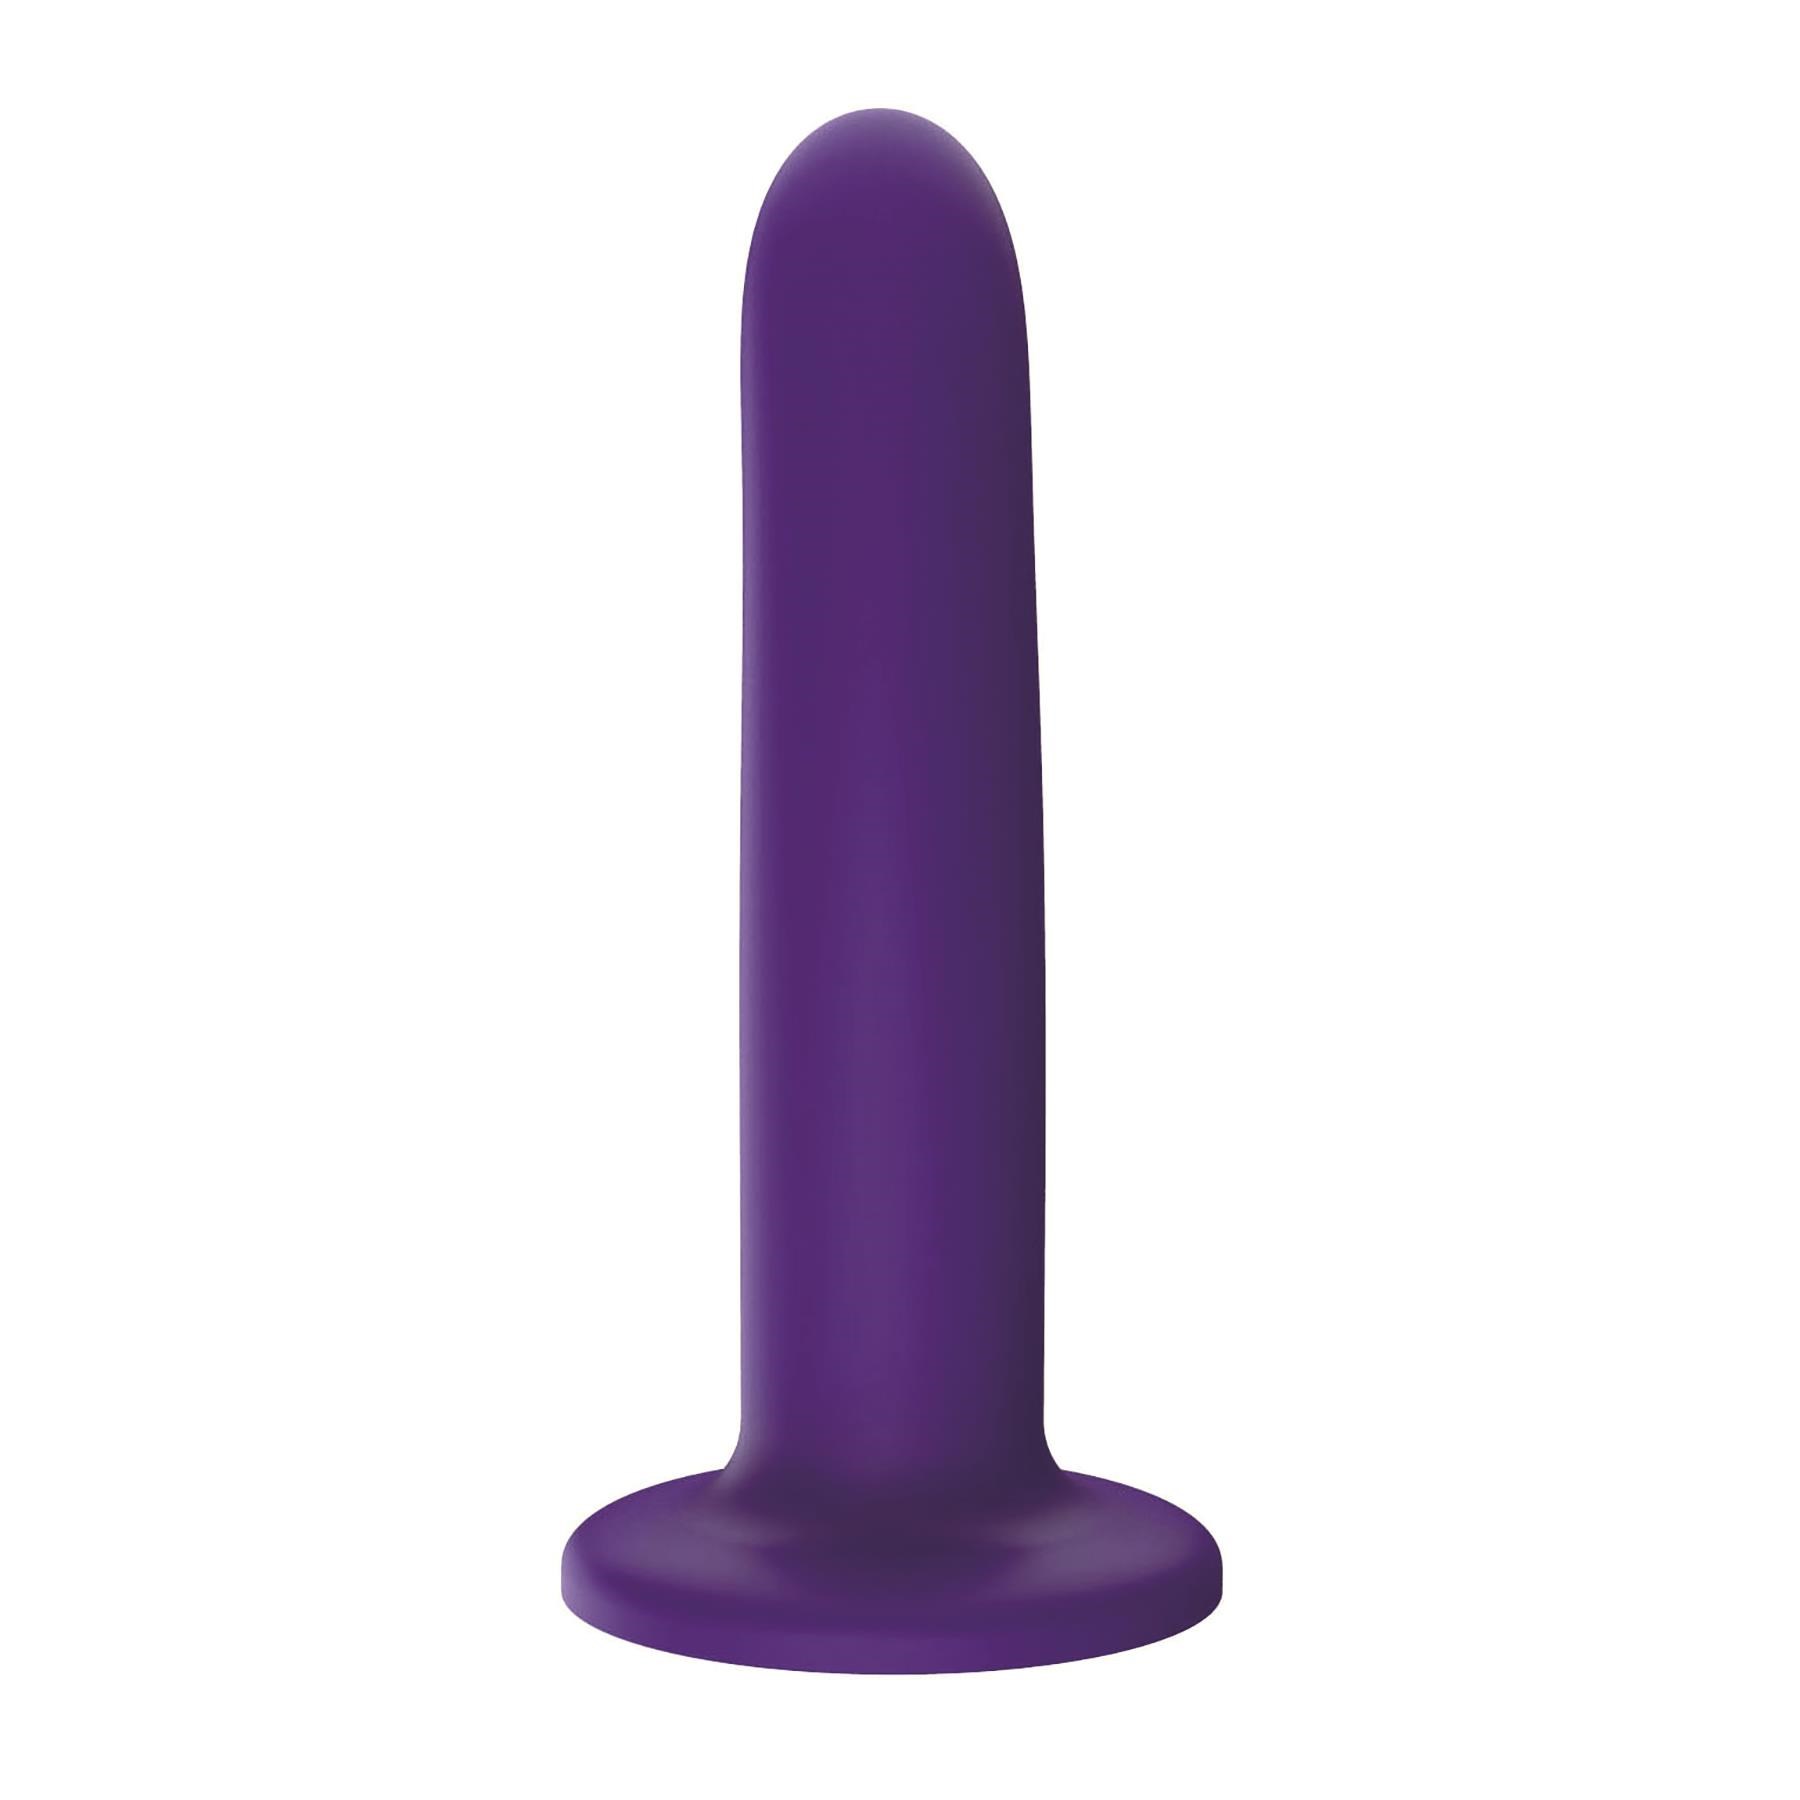 Wild Secrets Desire Silicone Dildo with Suction Cup - Product Shot #4